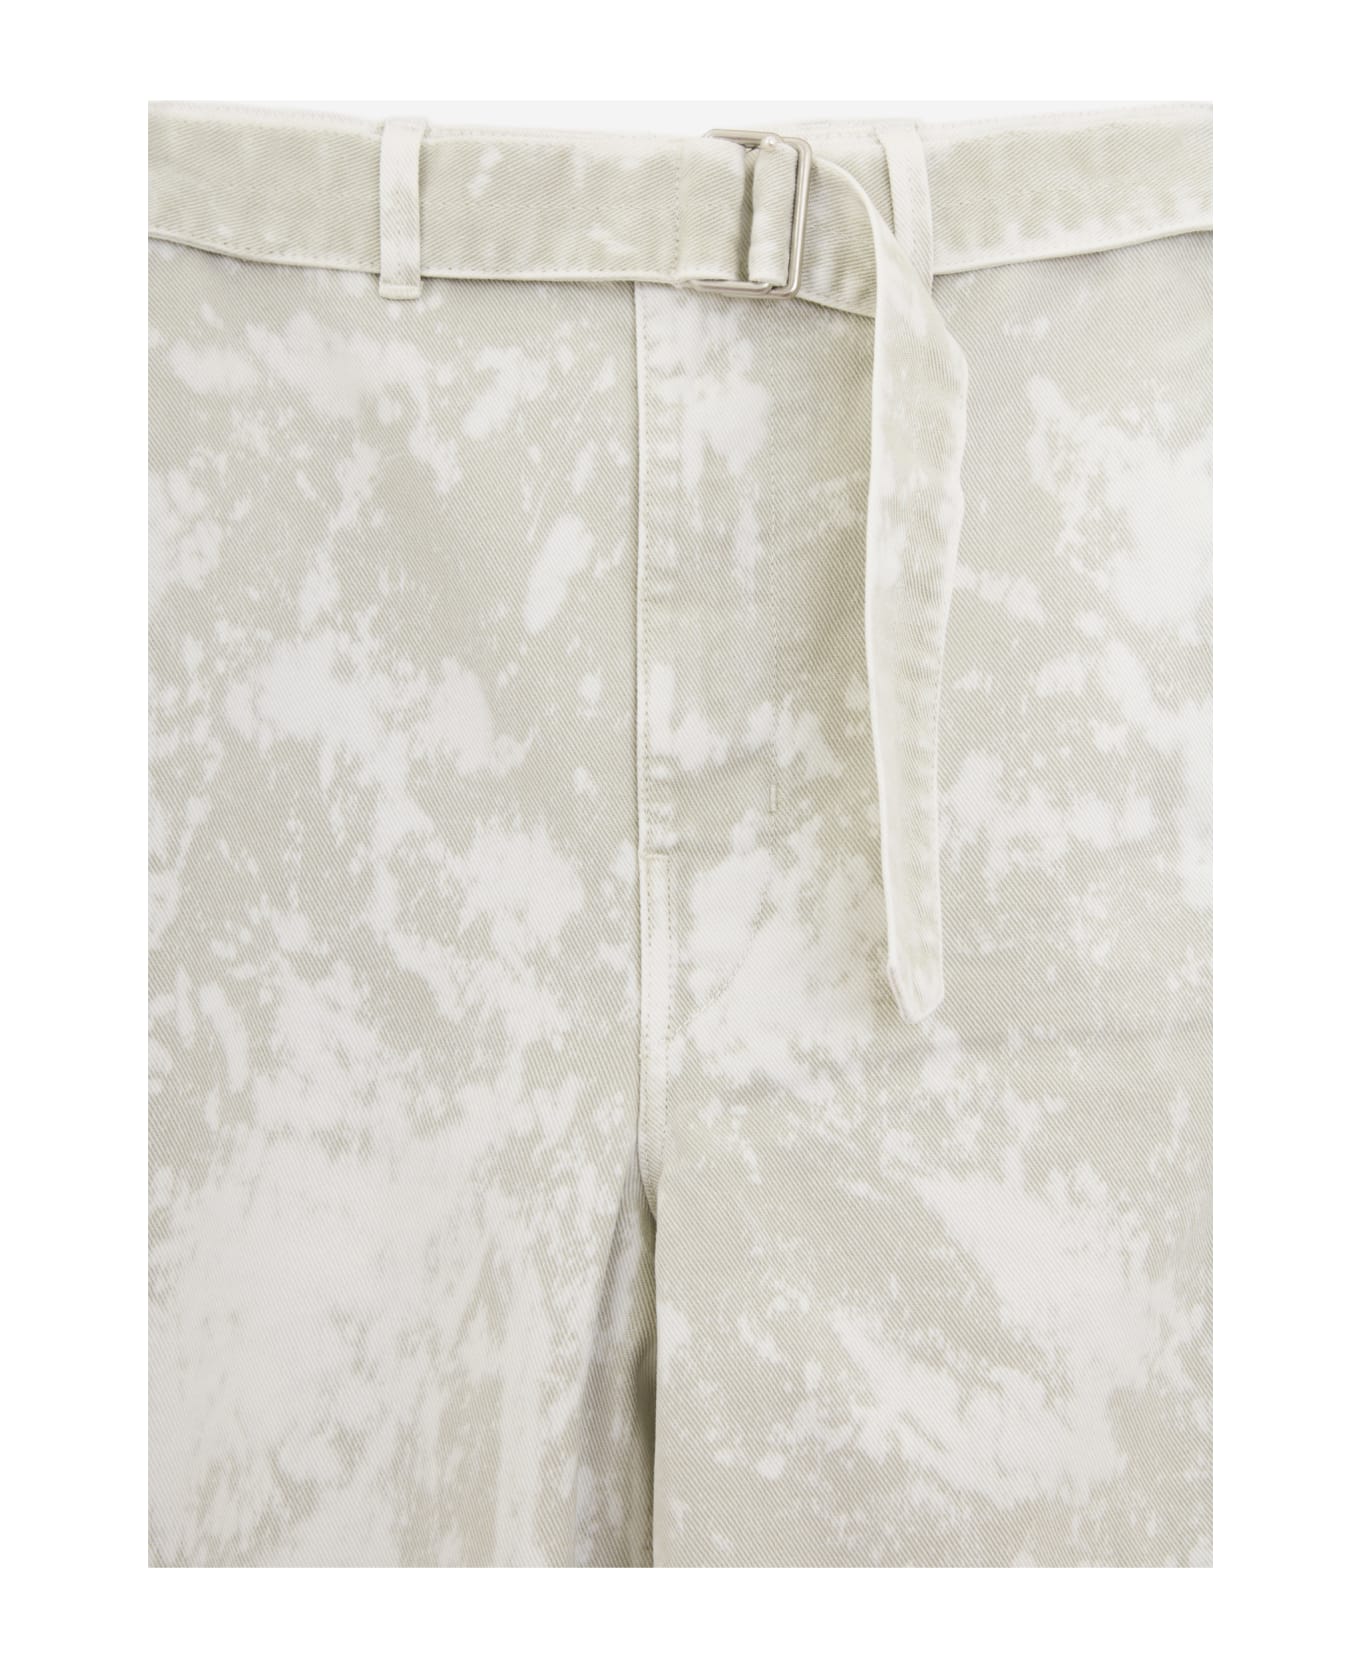 Lemaire Twisted Belted Pants Trouser - White